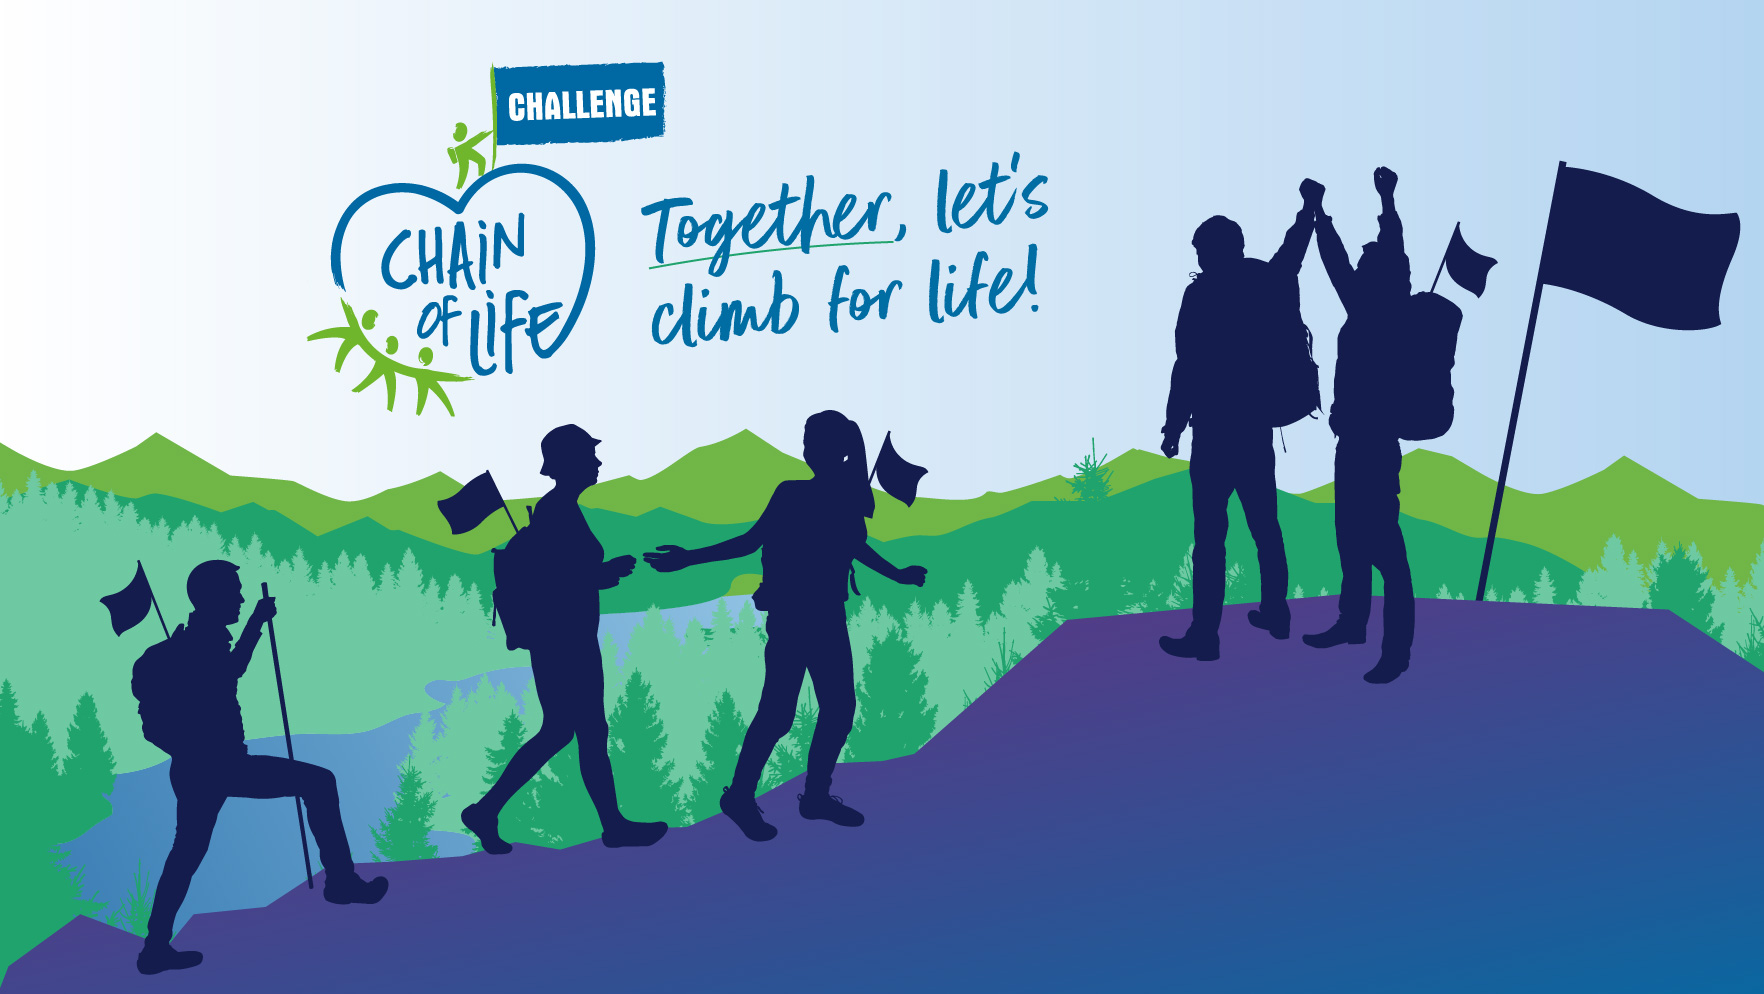 The Chain of Life Challenge is back in full swing on October 15 and 16, 2022!